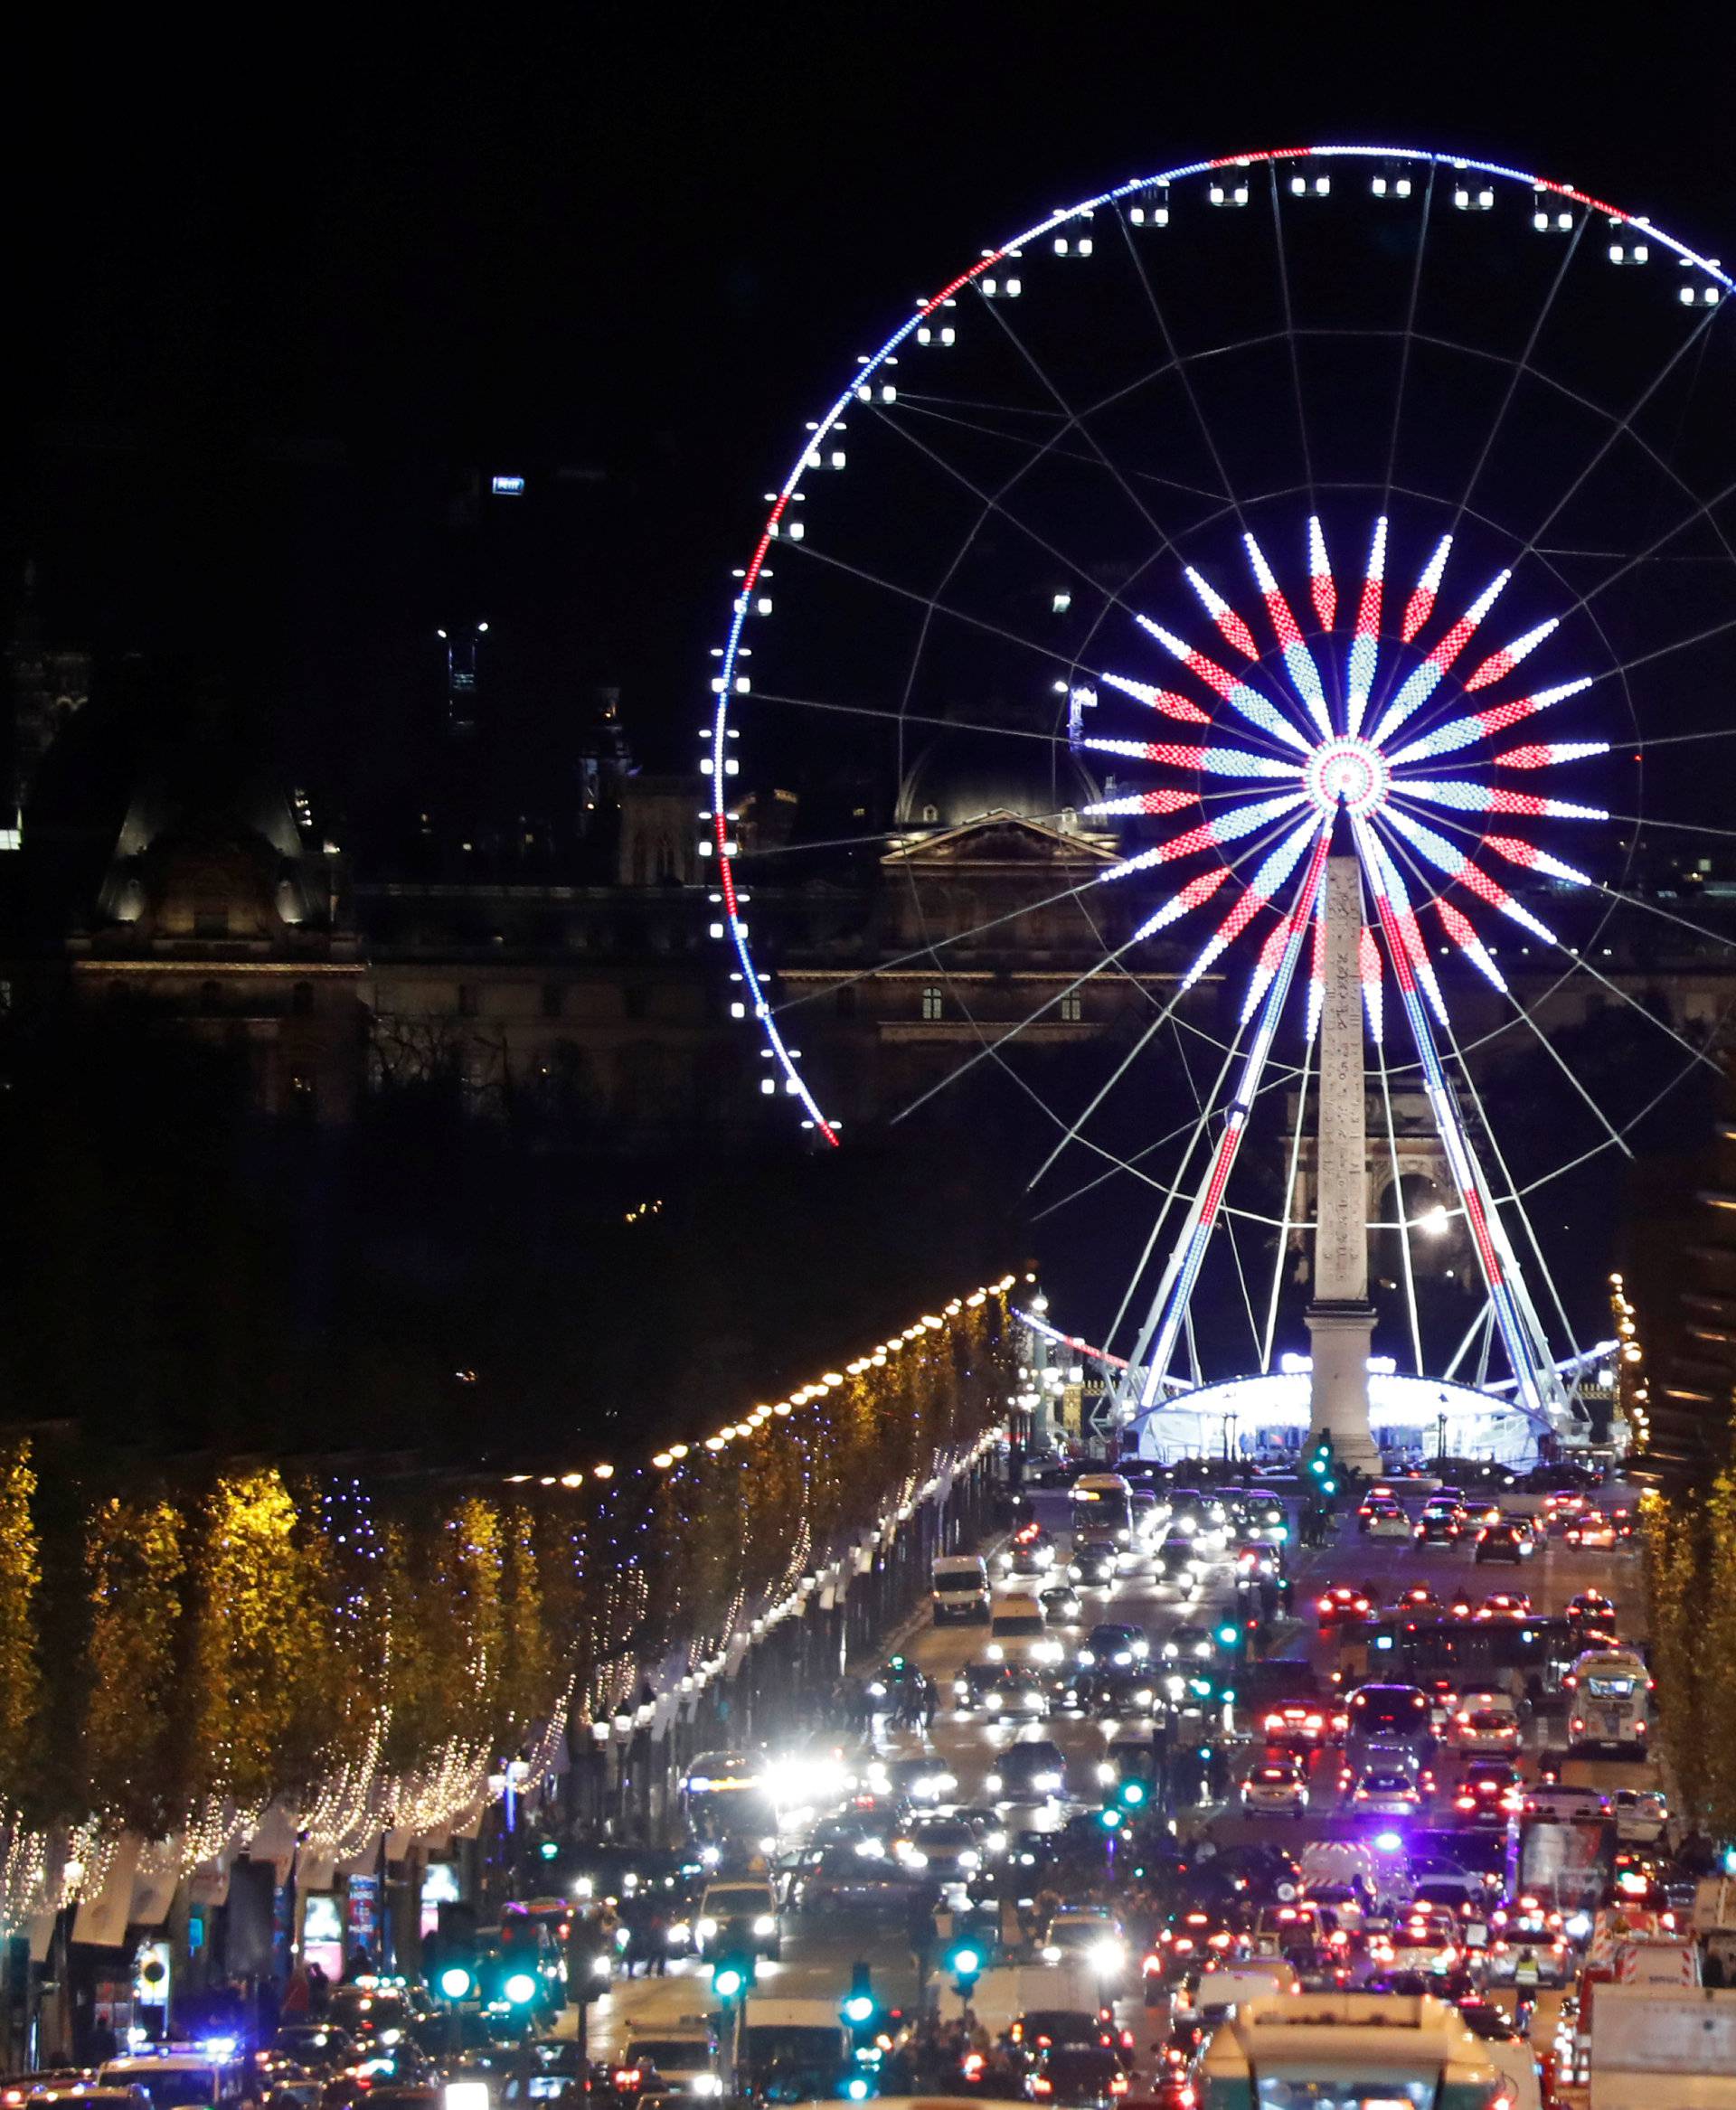 Christmas holiday lights hang from trees to illuminate Champs Elysees avenue in Paris as rush hour traffic fills the avenue leading down to the Giant Ferris Wheel at place de la Concorde in Paris